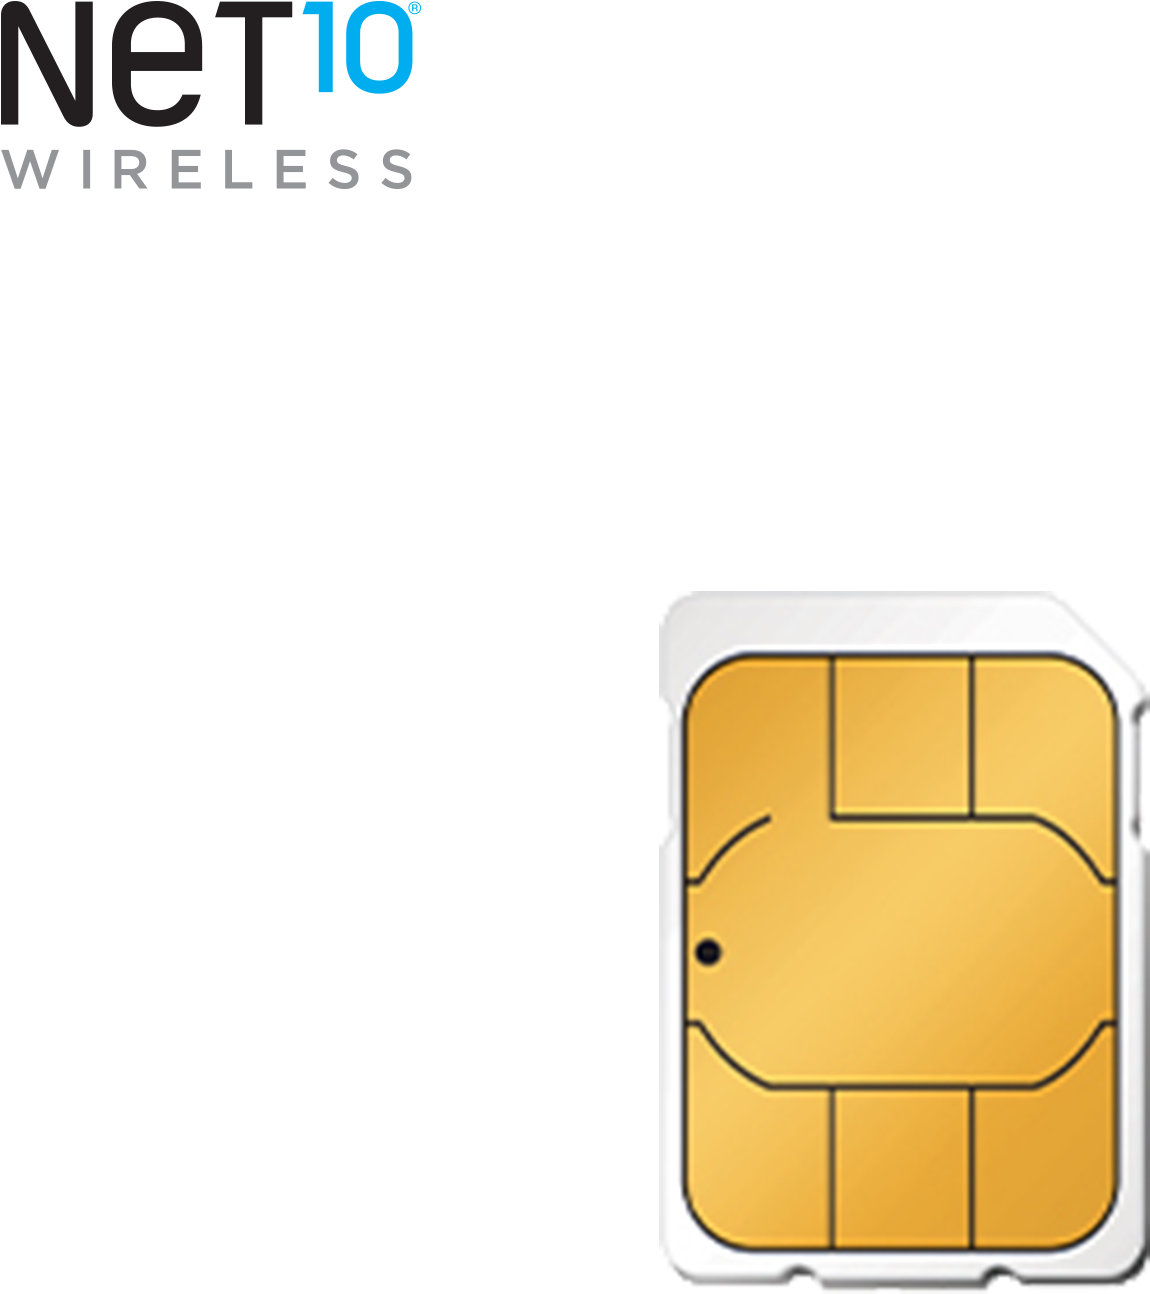 Net10 Wireless S I M Card PNG image